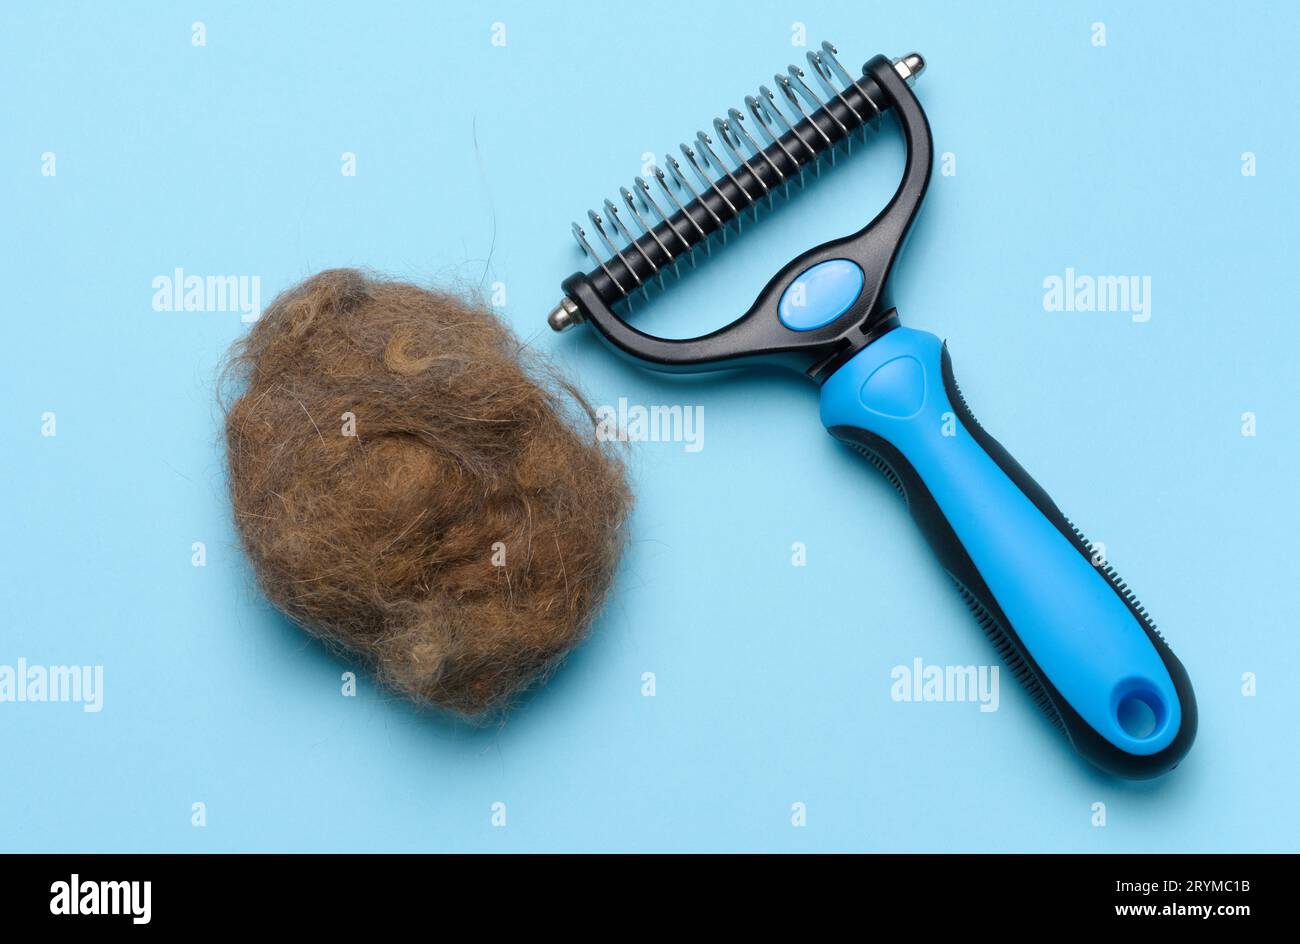 Animal trimmer and a tuft of gray wool on a blue background, top view. Item for grooming Stock Photo